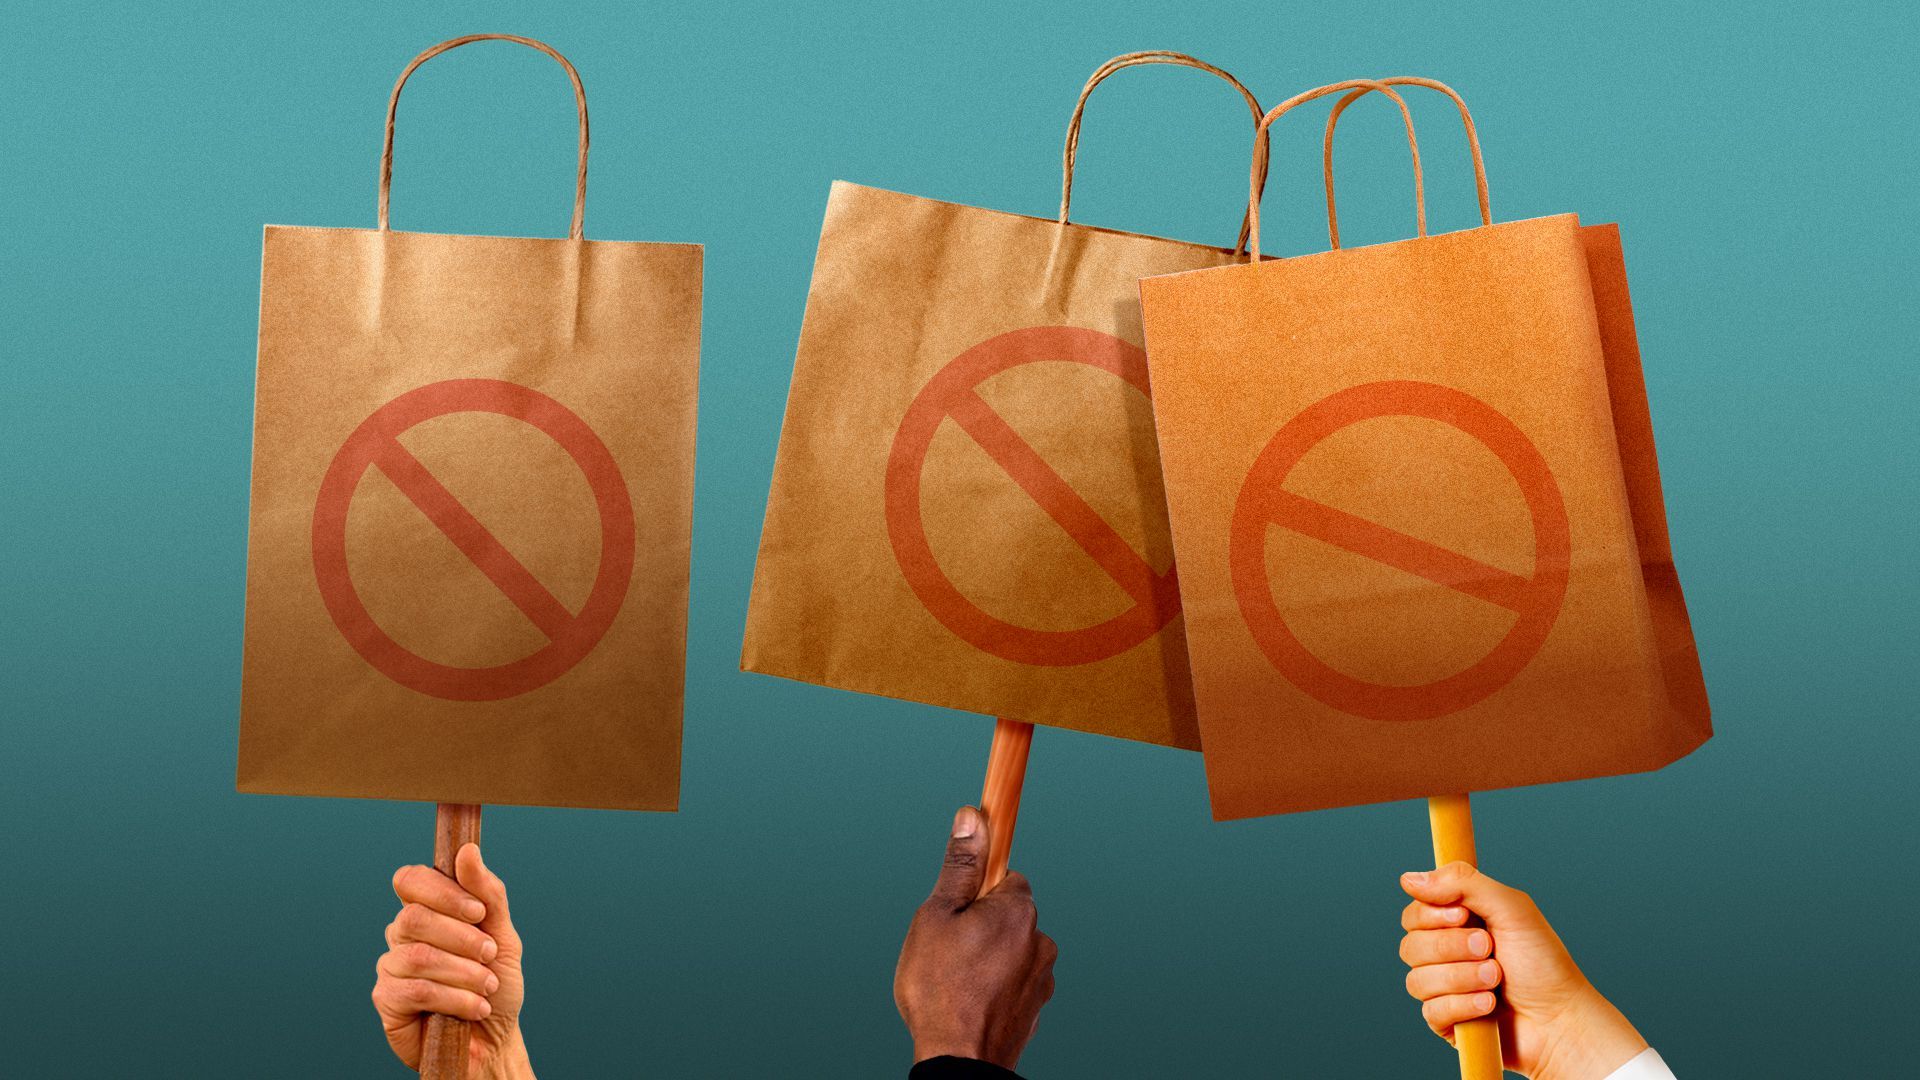 Illustration of hands holding picket signs made from shopping bags.